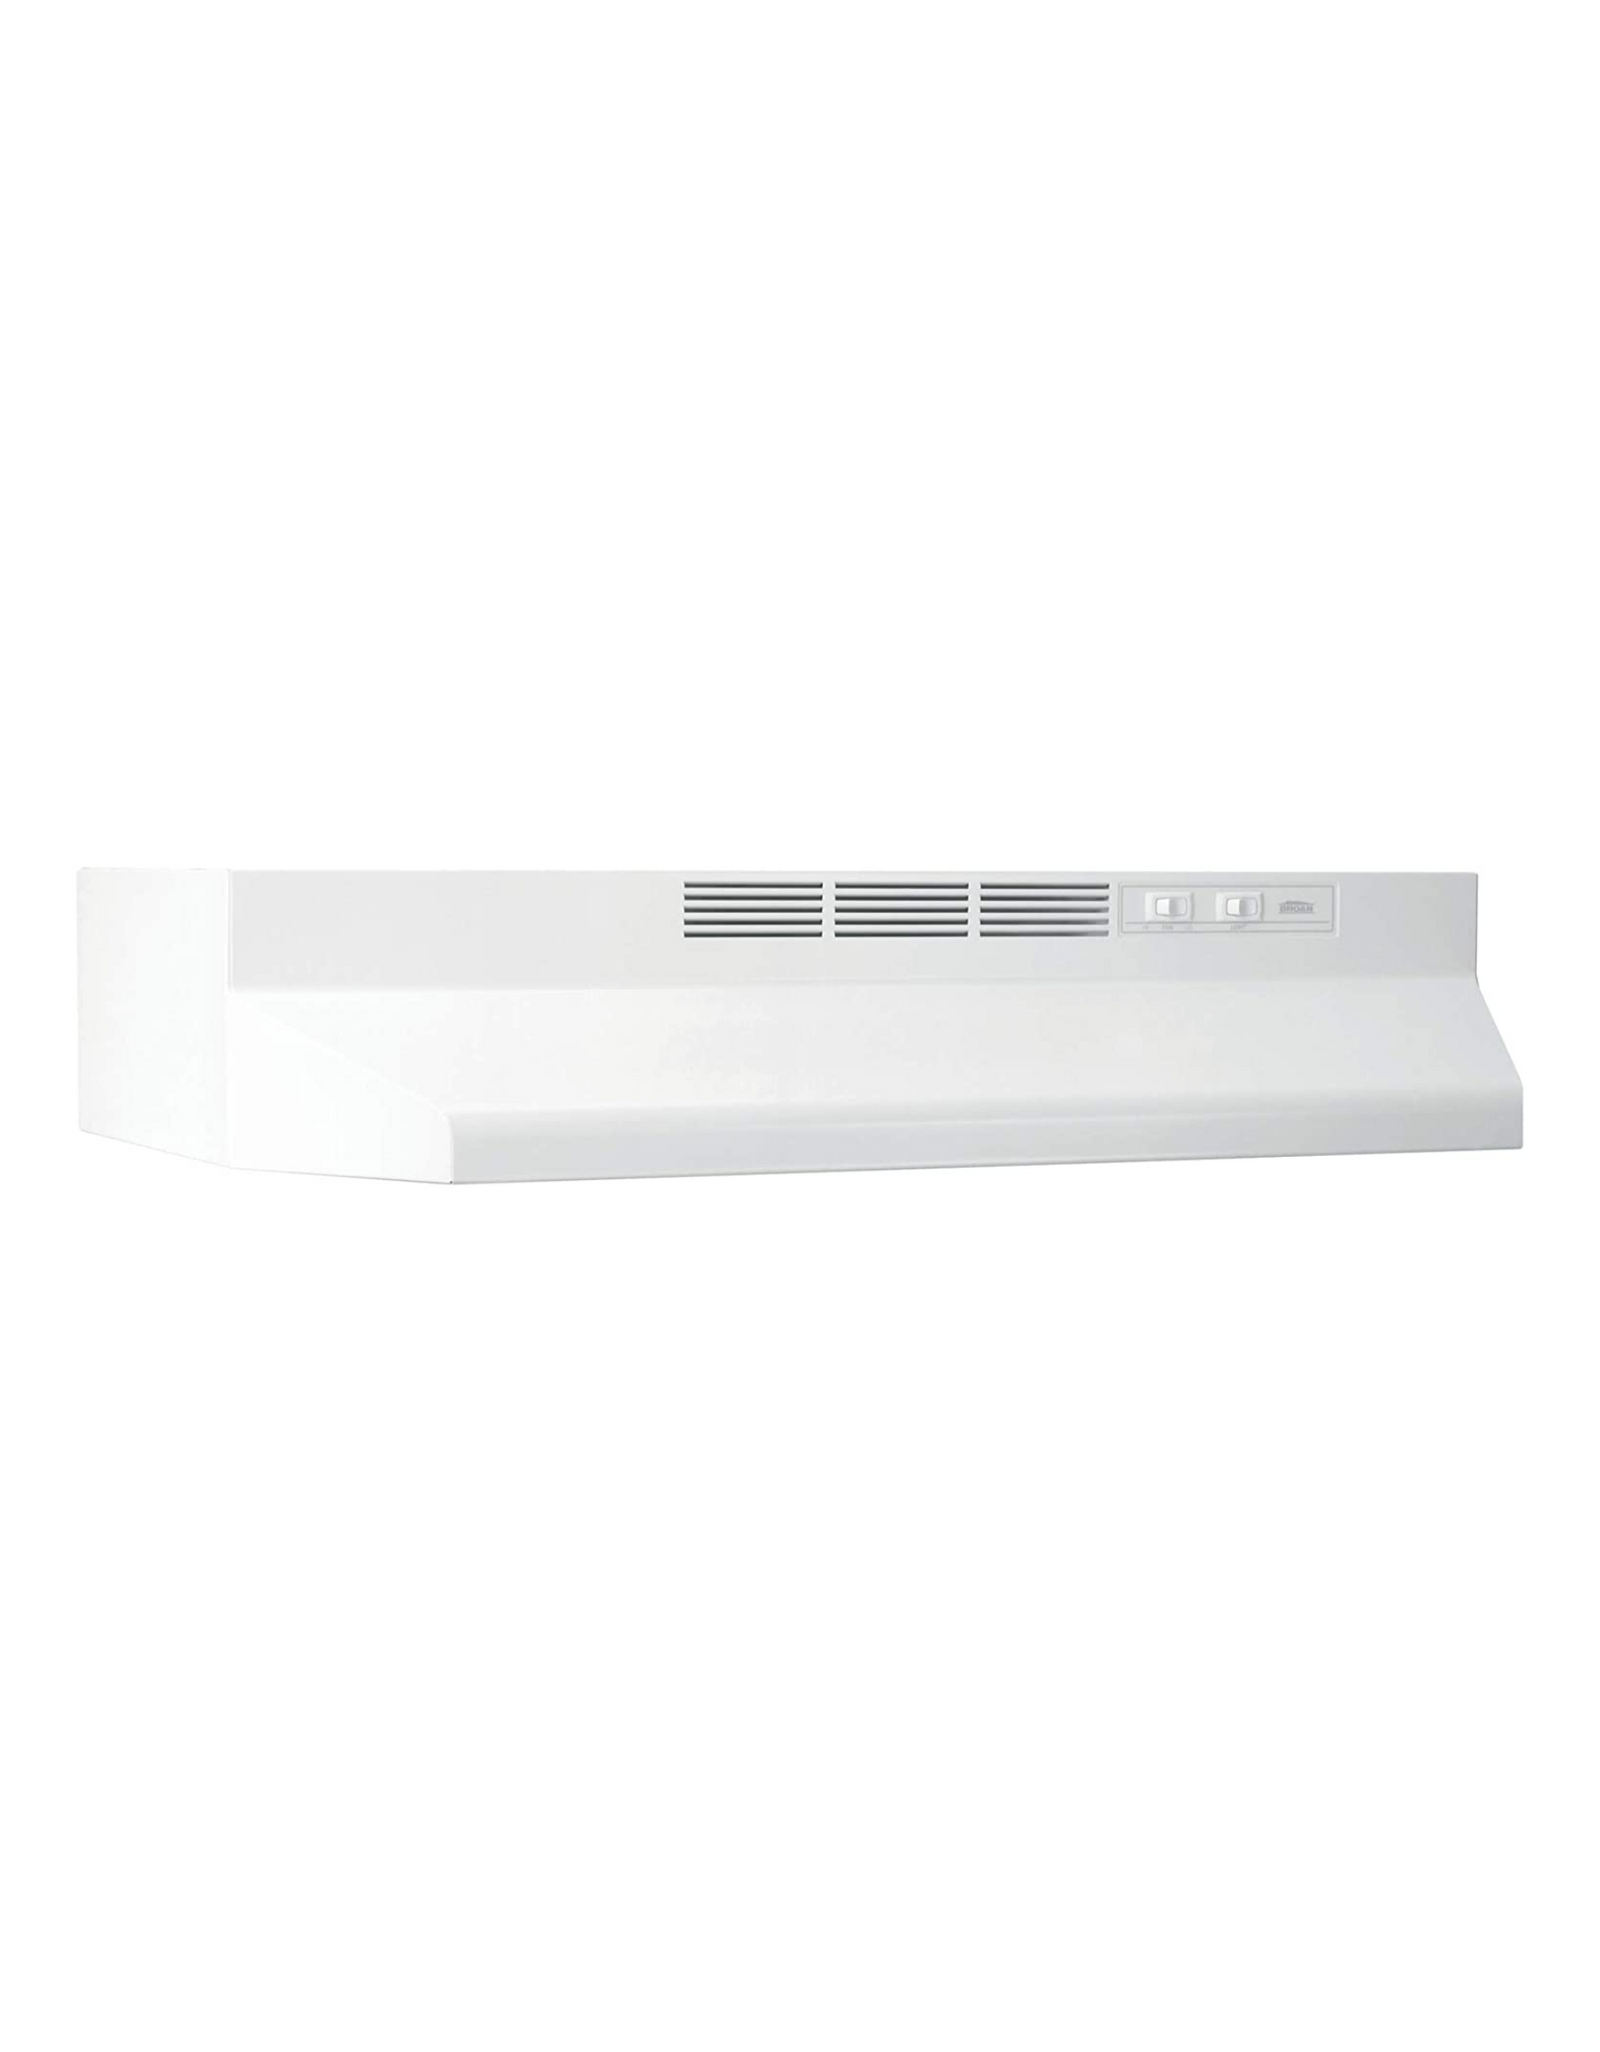 Broan-NuTone 412401 Non-Ducted Under-Cabinet Ductless Range Hood Insert, 24", White